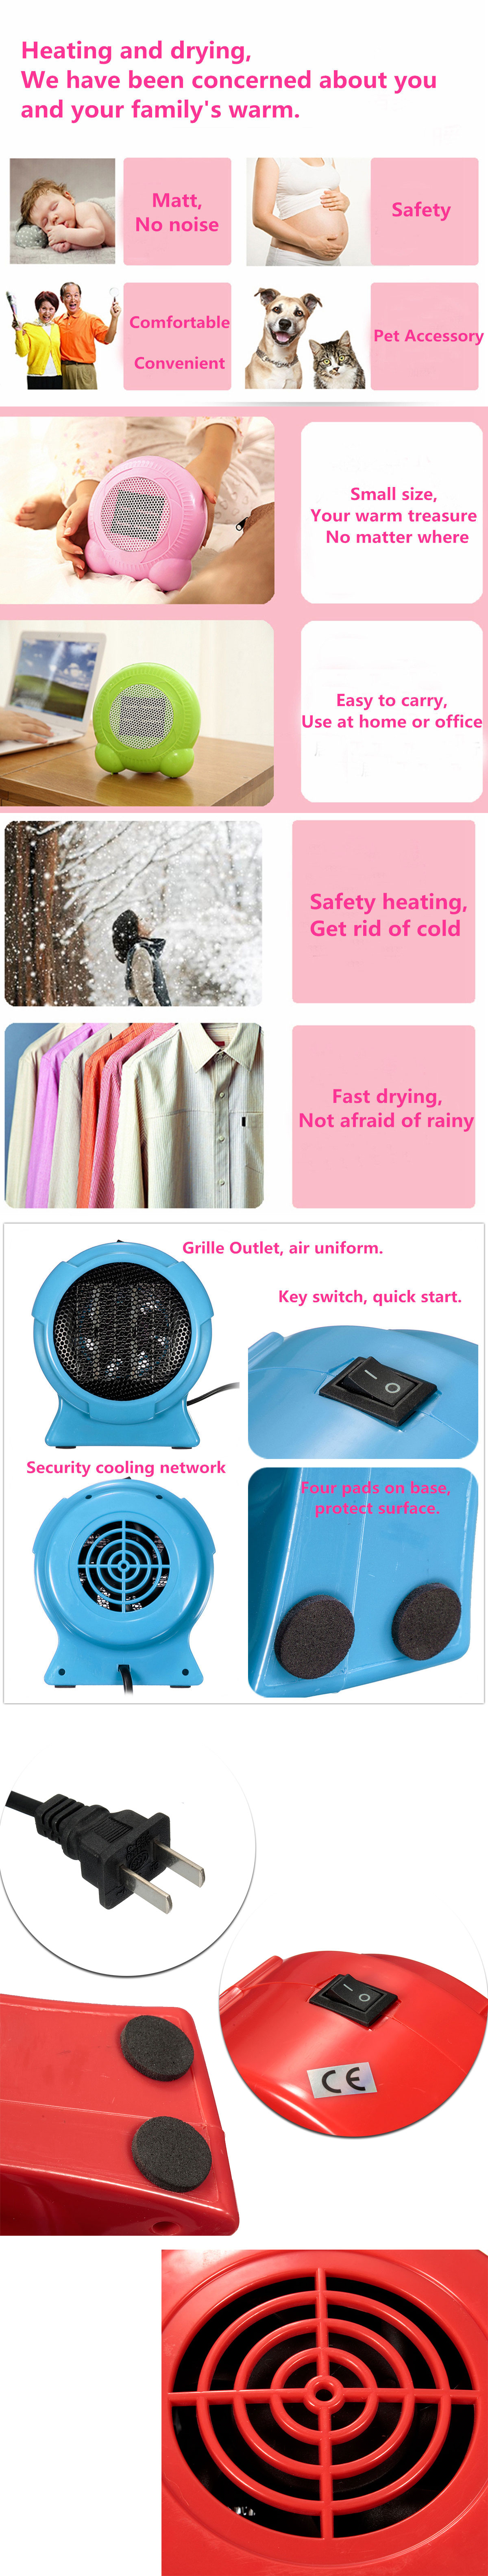 220V-Mini-Winter-Warm-Home-Office-Desktop-Dry-Electricity-Energy-Heater-Grille-Outlet-Gift-Machine-H-1023055